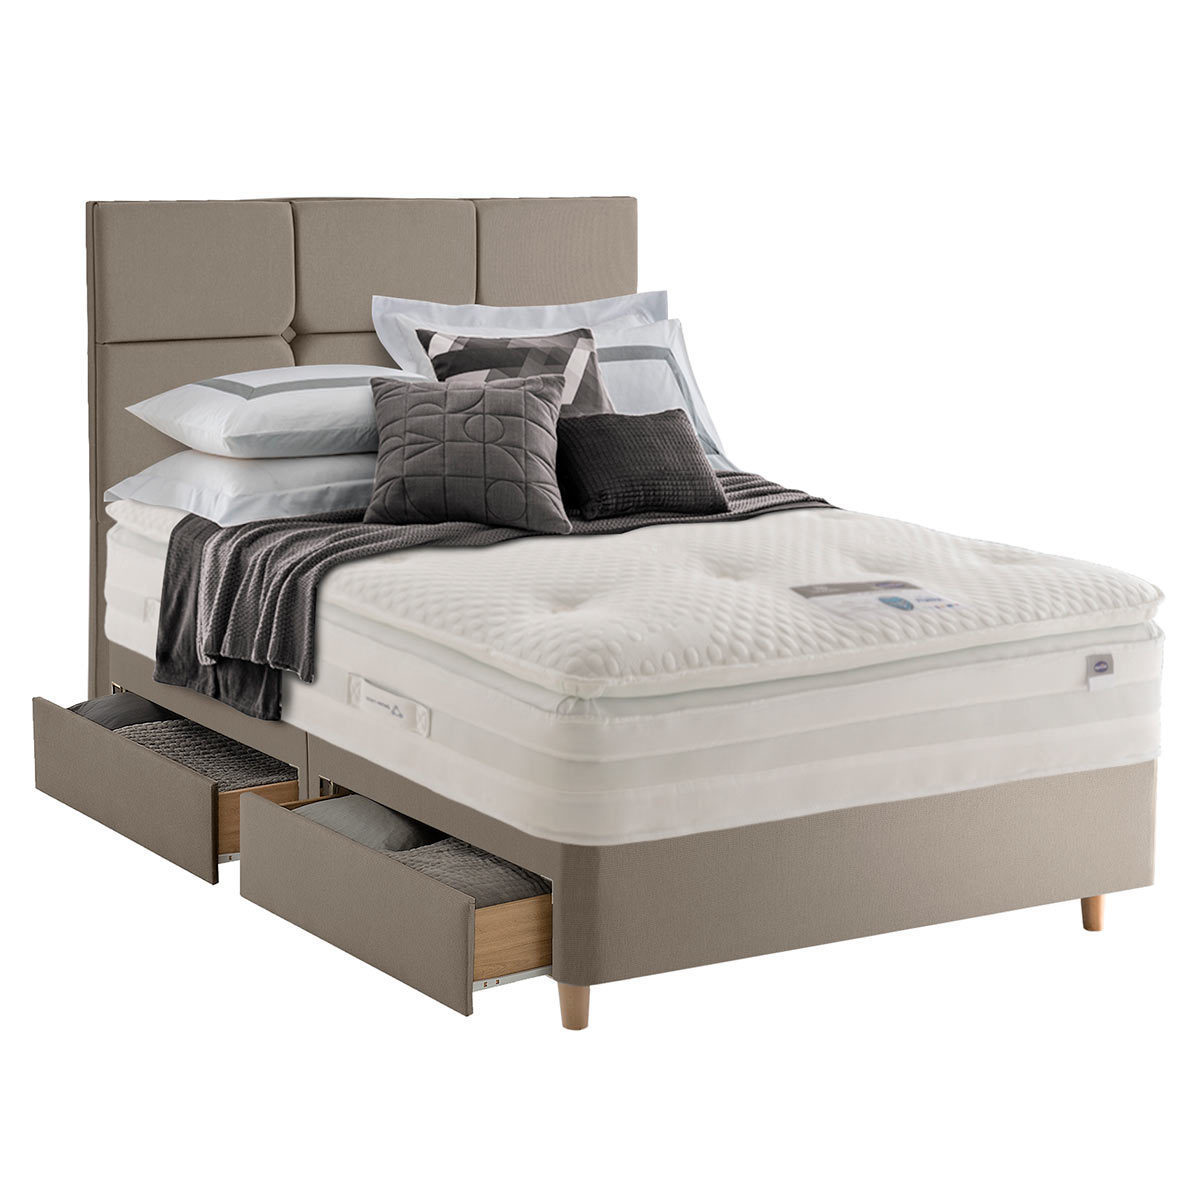 Cut out image of sandstone divan and headboard with mattress (not included)